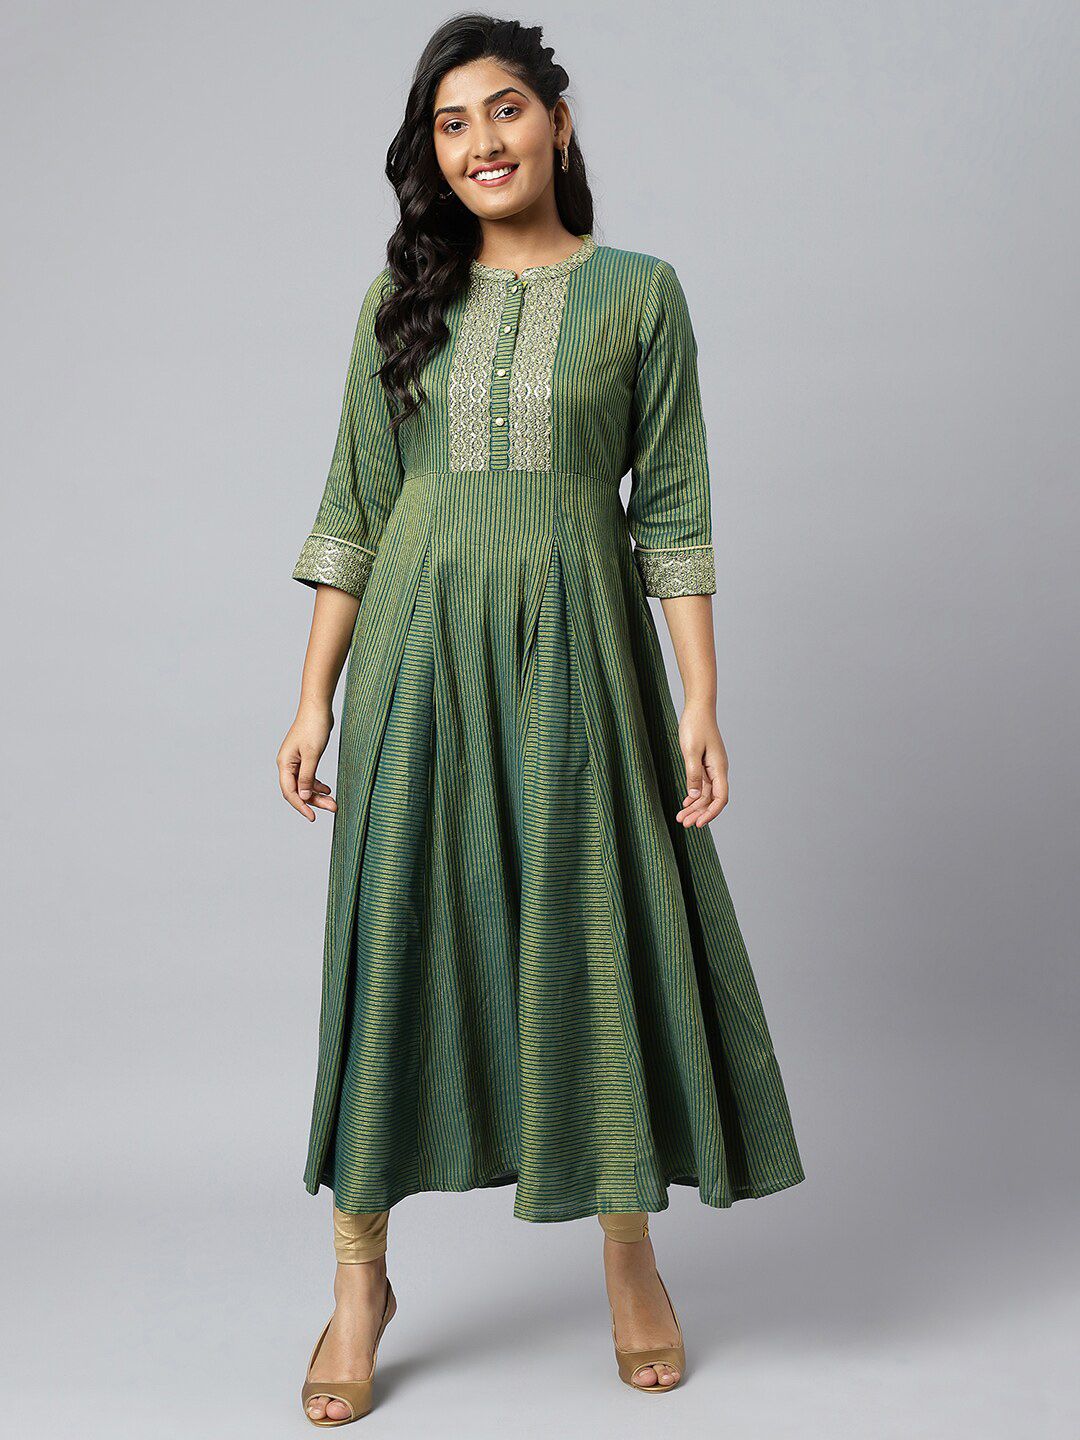 AURELIA Green & Gold-Toned Embellished Striped Ethnic Maxi Dress Price in India